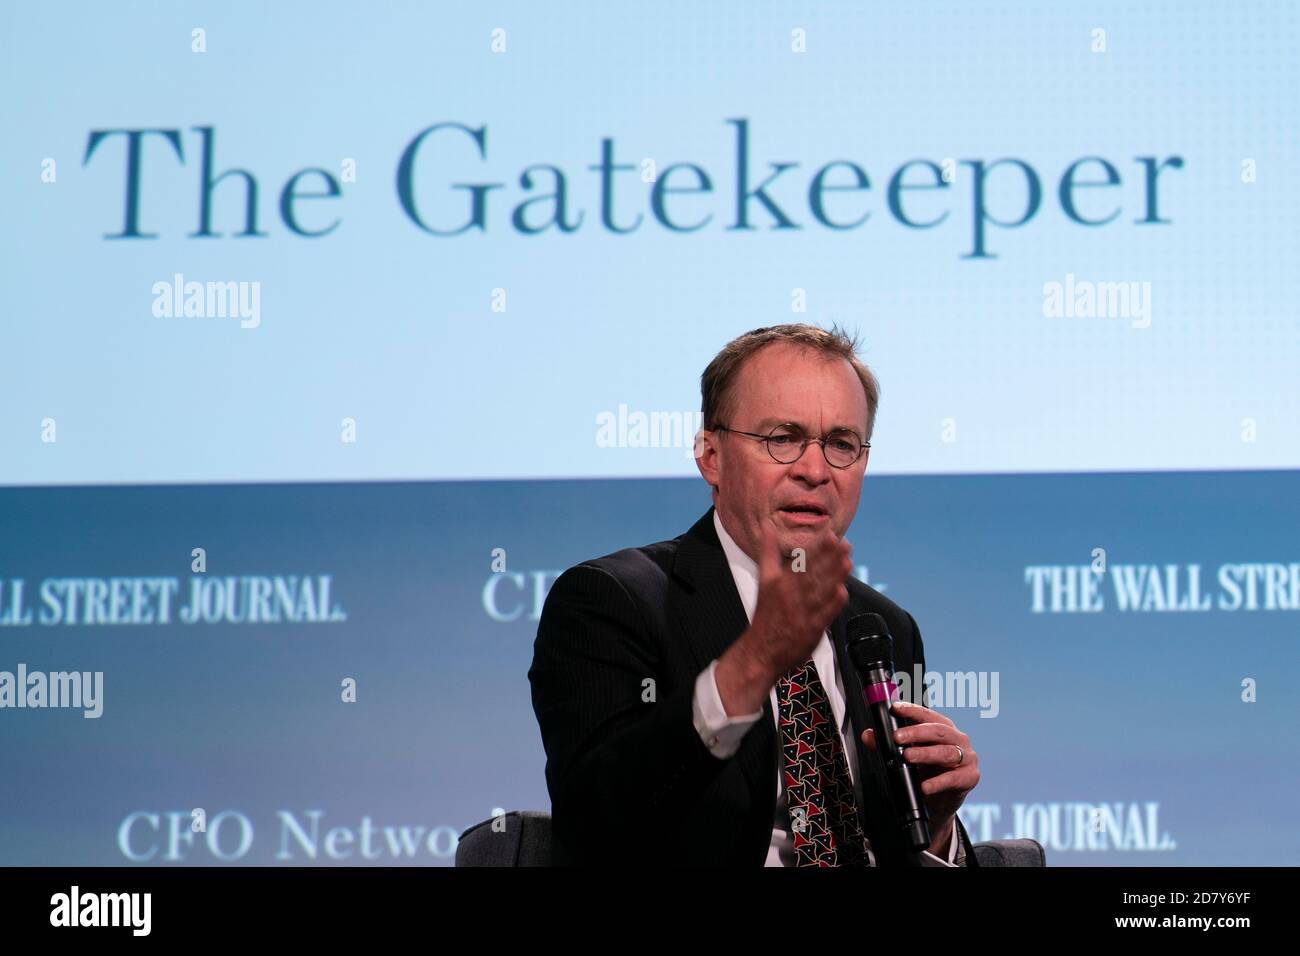 Mick Mulvaney, acting White House chief of staff, speaks during the Wall Street Journal CFO Network conference in Washington, D.C., U.S., on Tuesday, June 11, 2019. Panelists will discuss how rules governing financial reporting and corporate behavior will change and explore the mergers and acquisition landscape and corporate activism. Credit: Alex Edelman/The Photo Access Stock Photo